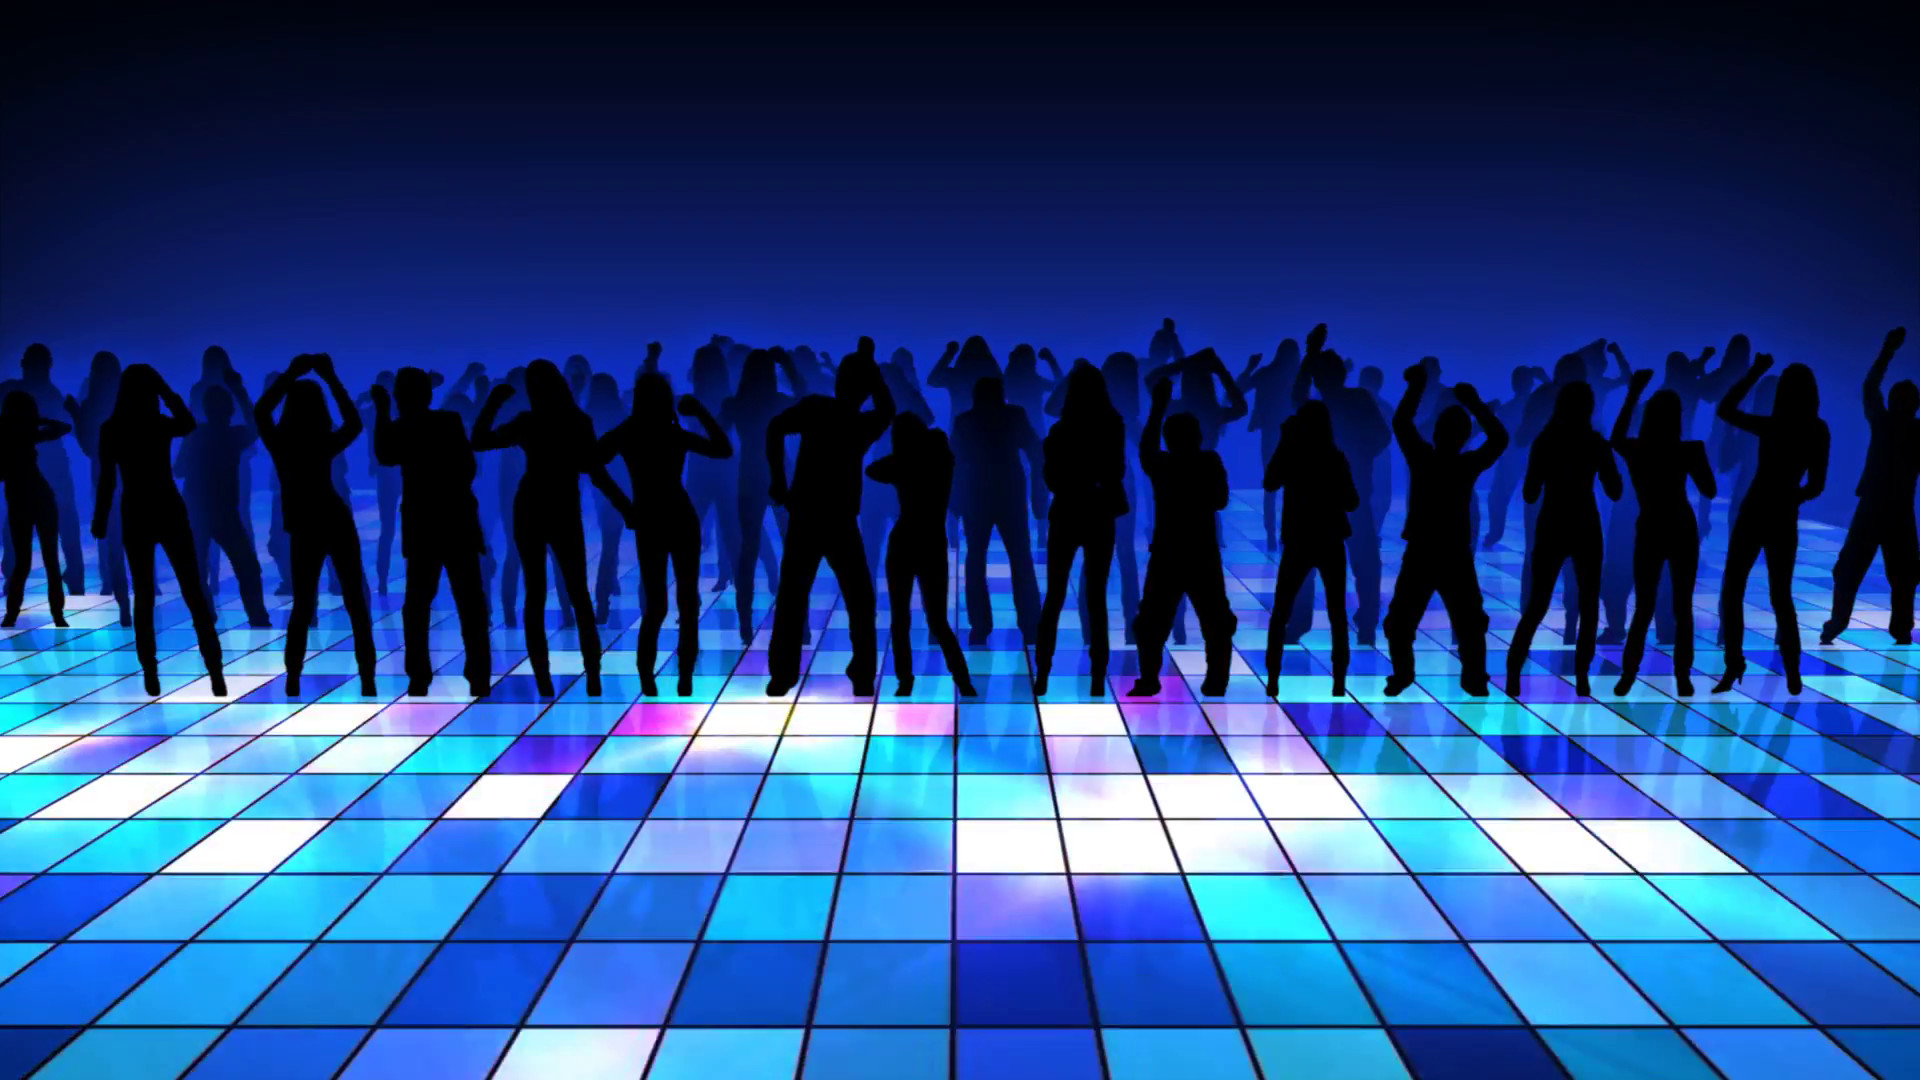 1920x1080 Dancing people dark silhouettes with lights on the background. 